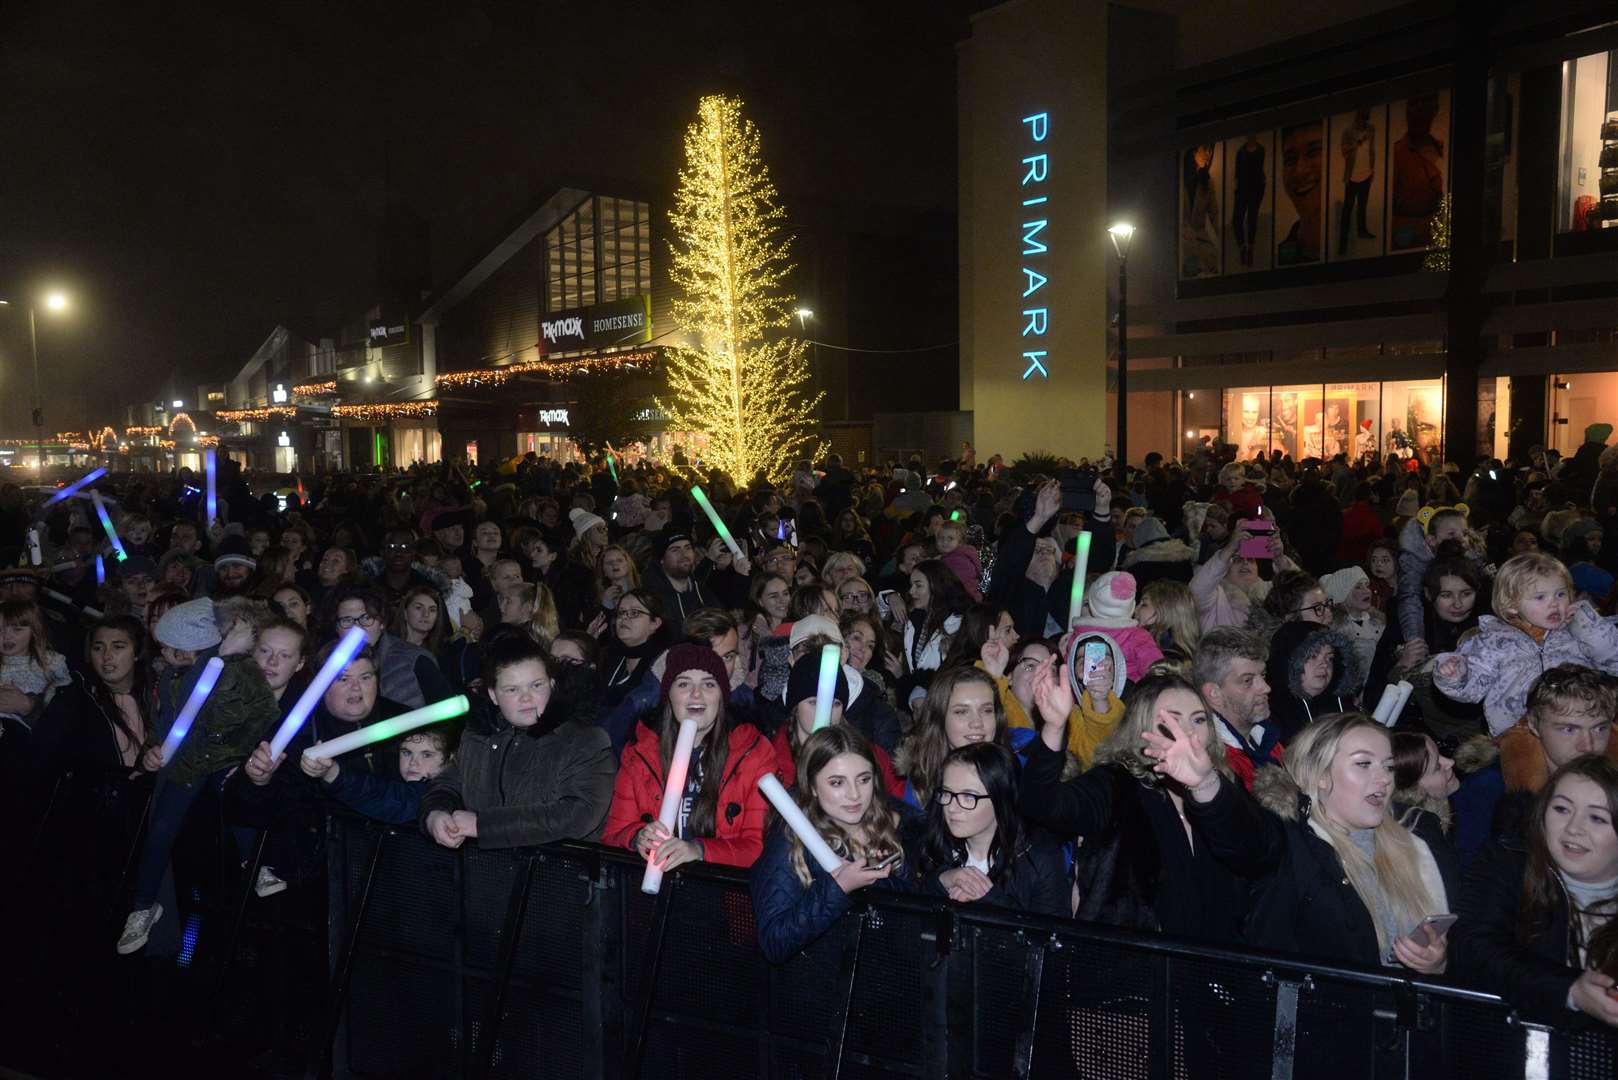 Westwood Cross shopping centre will have lots going on this Christmas